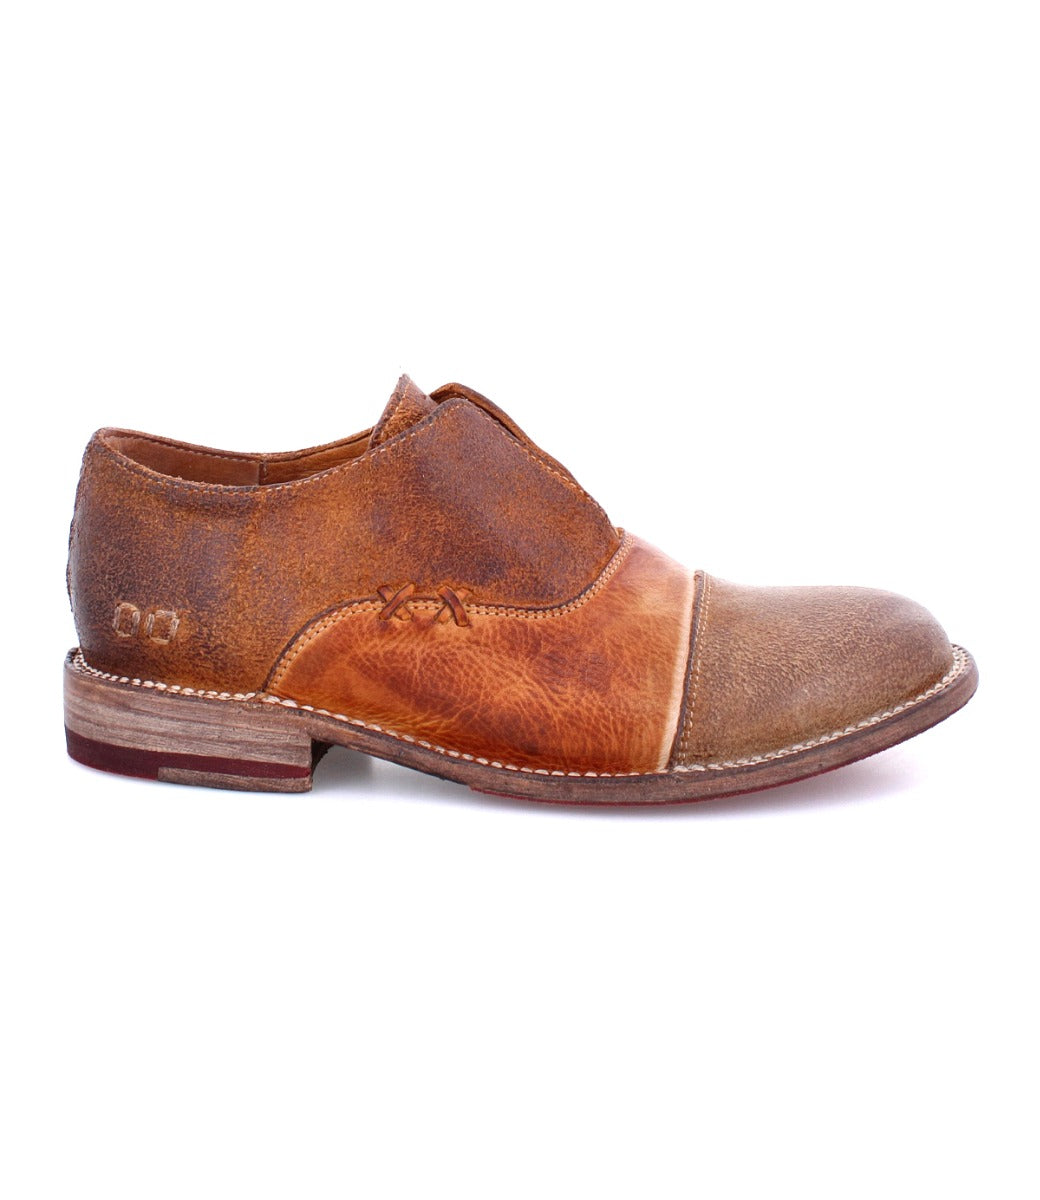 A men's Garden M brown and tan oxford shoe by Bed Stu.